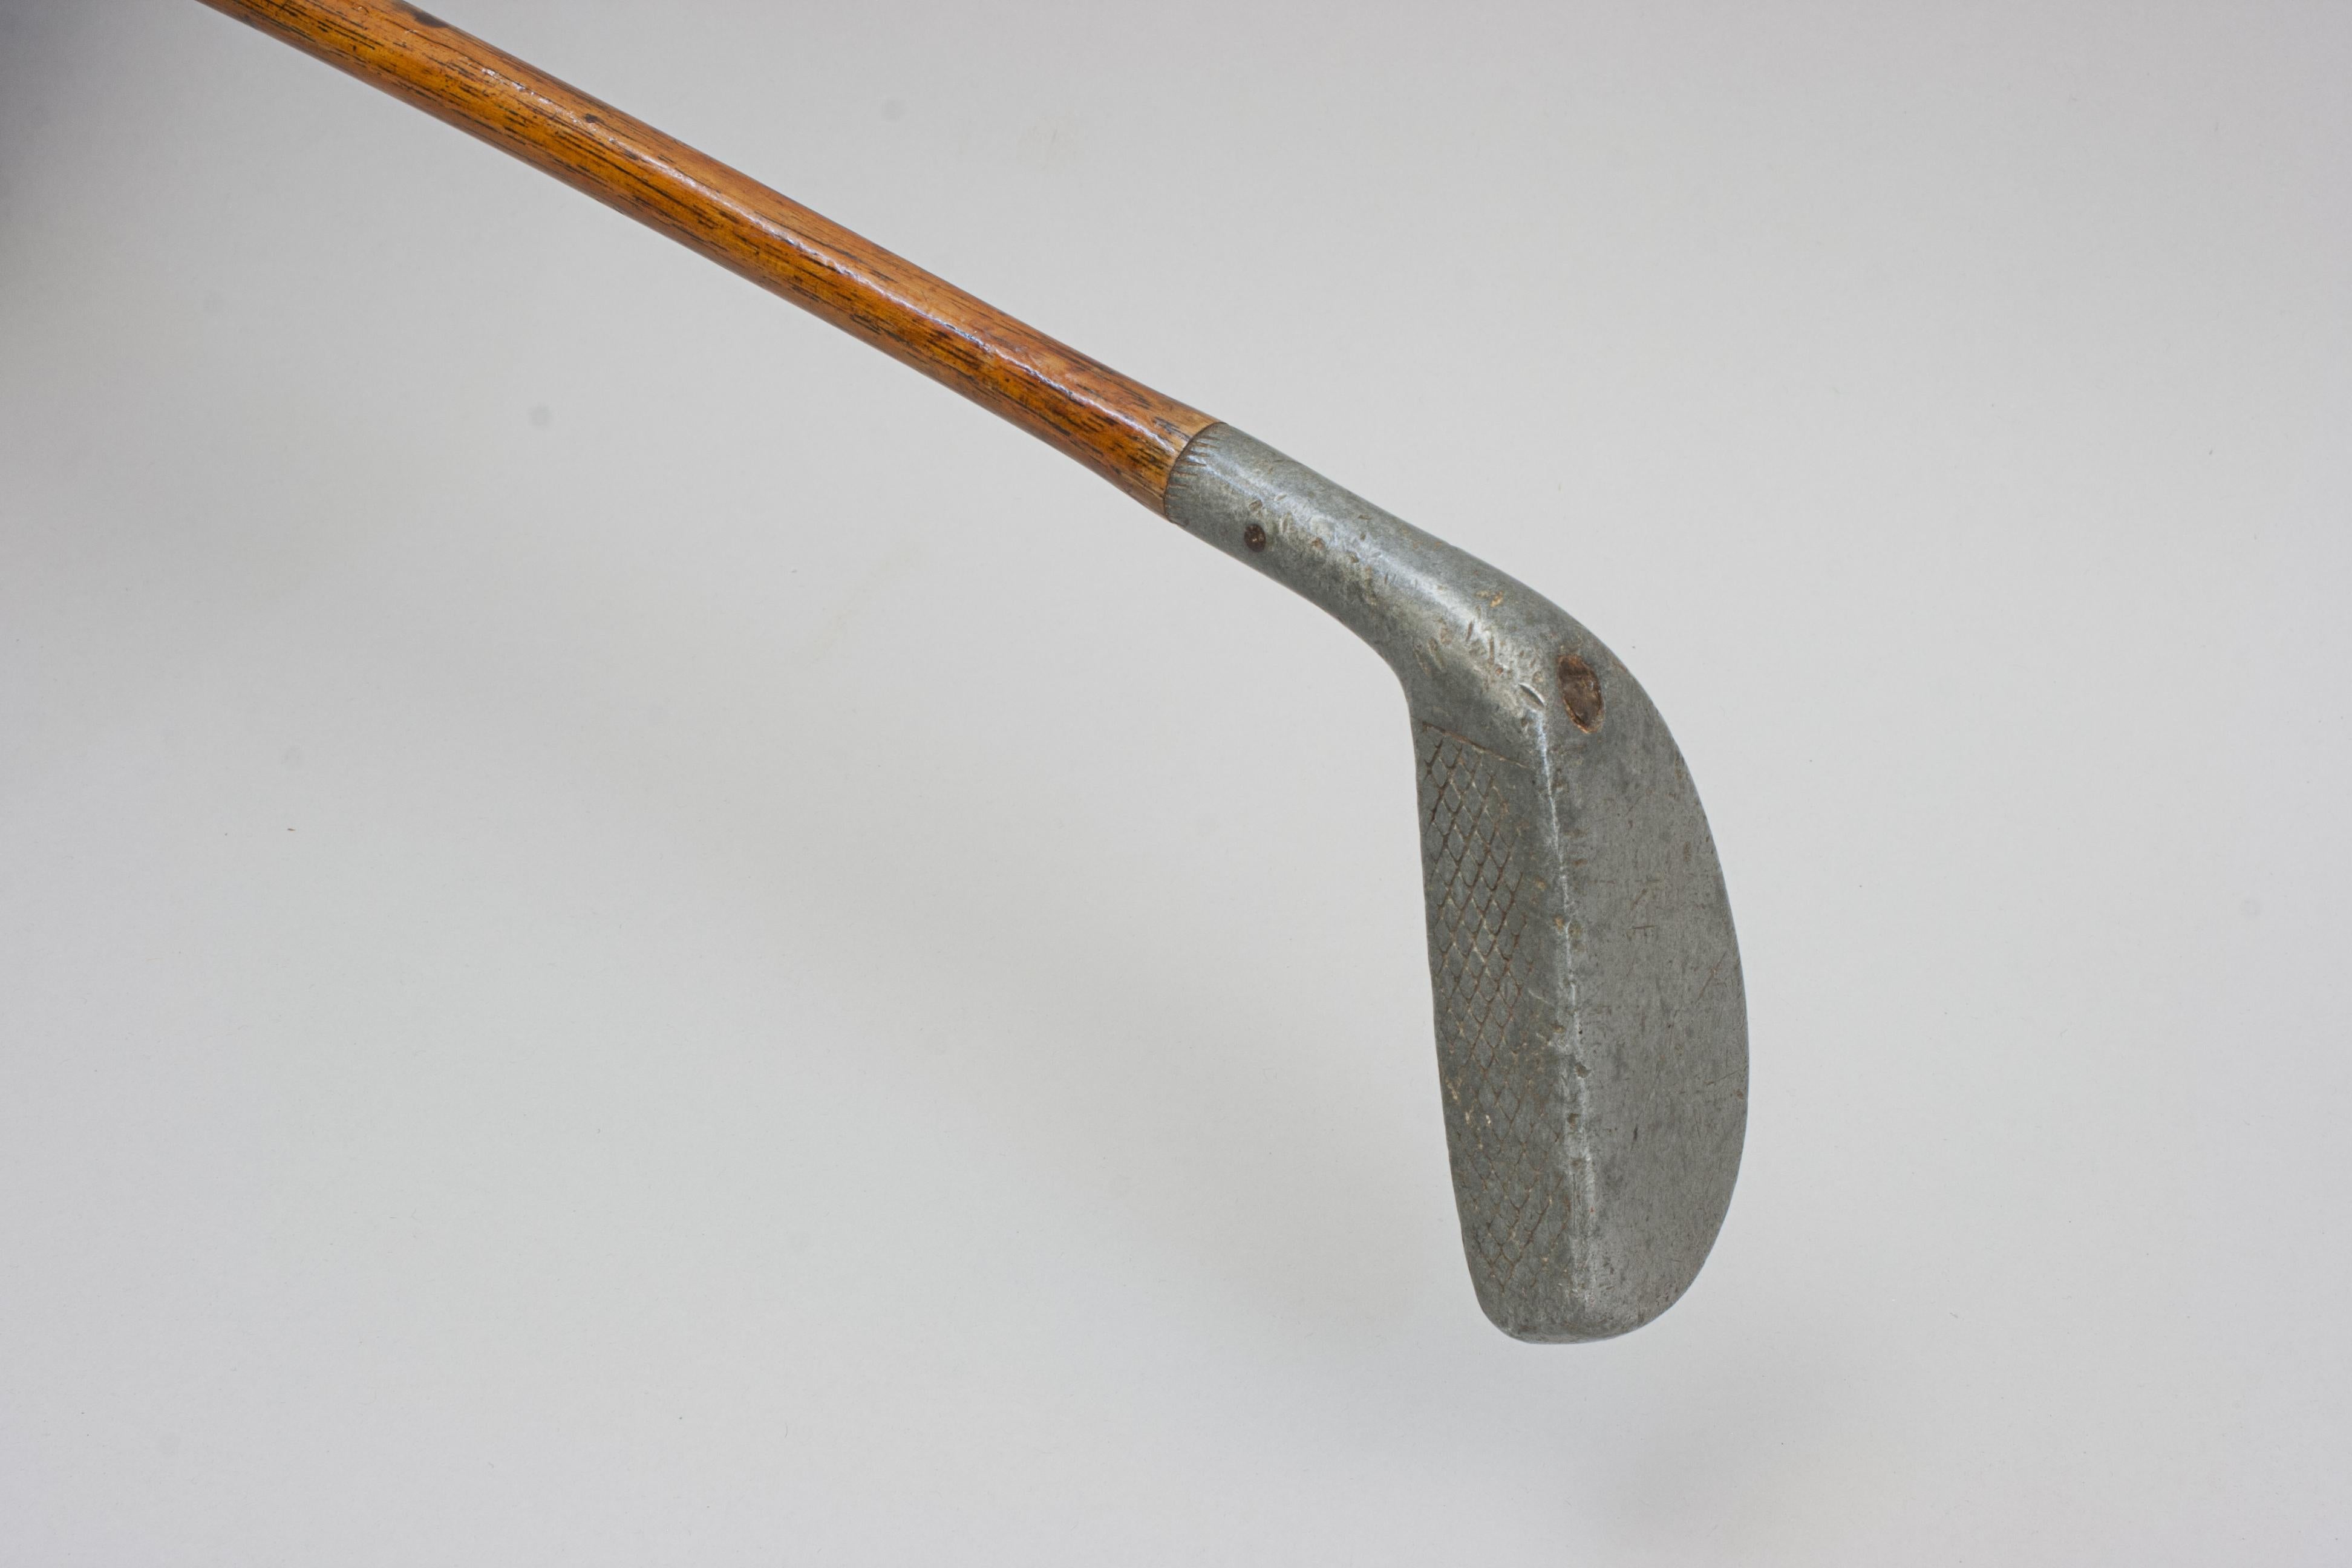 Aluminum Vintage Golf Club, Putter With Alloy Head